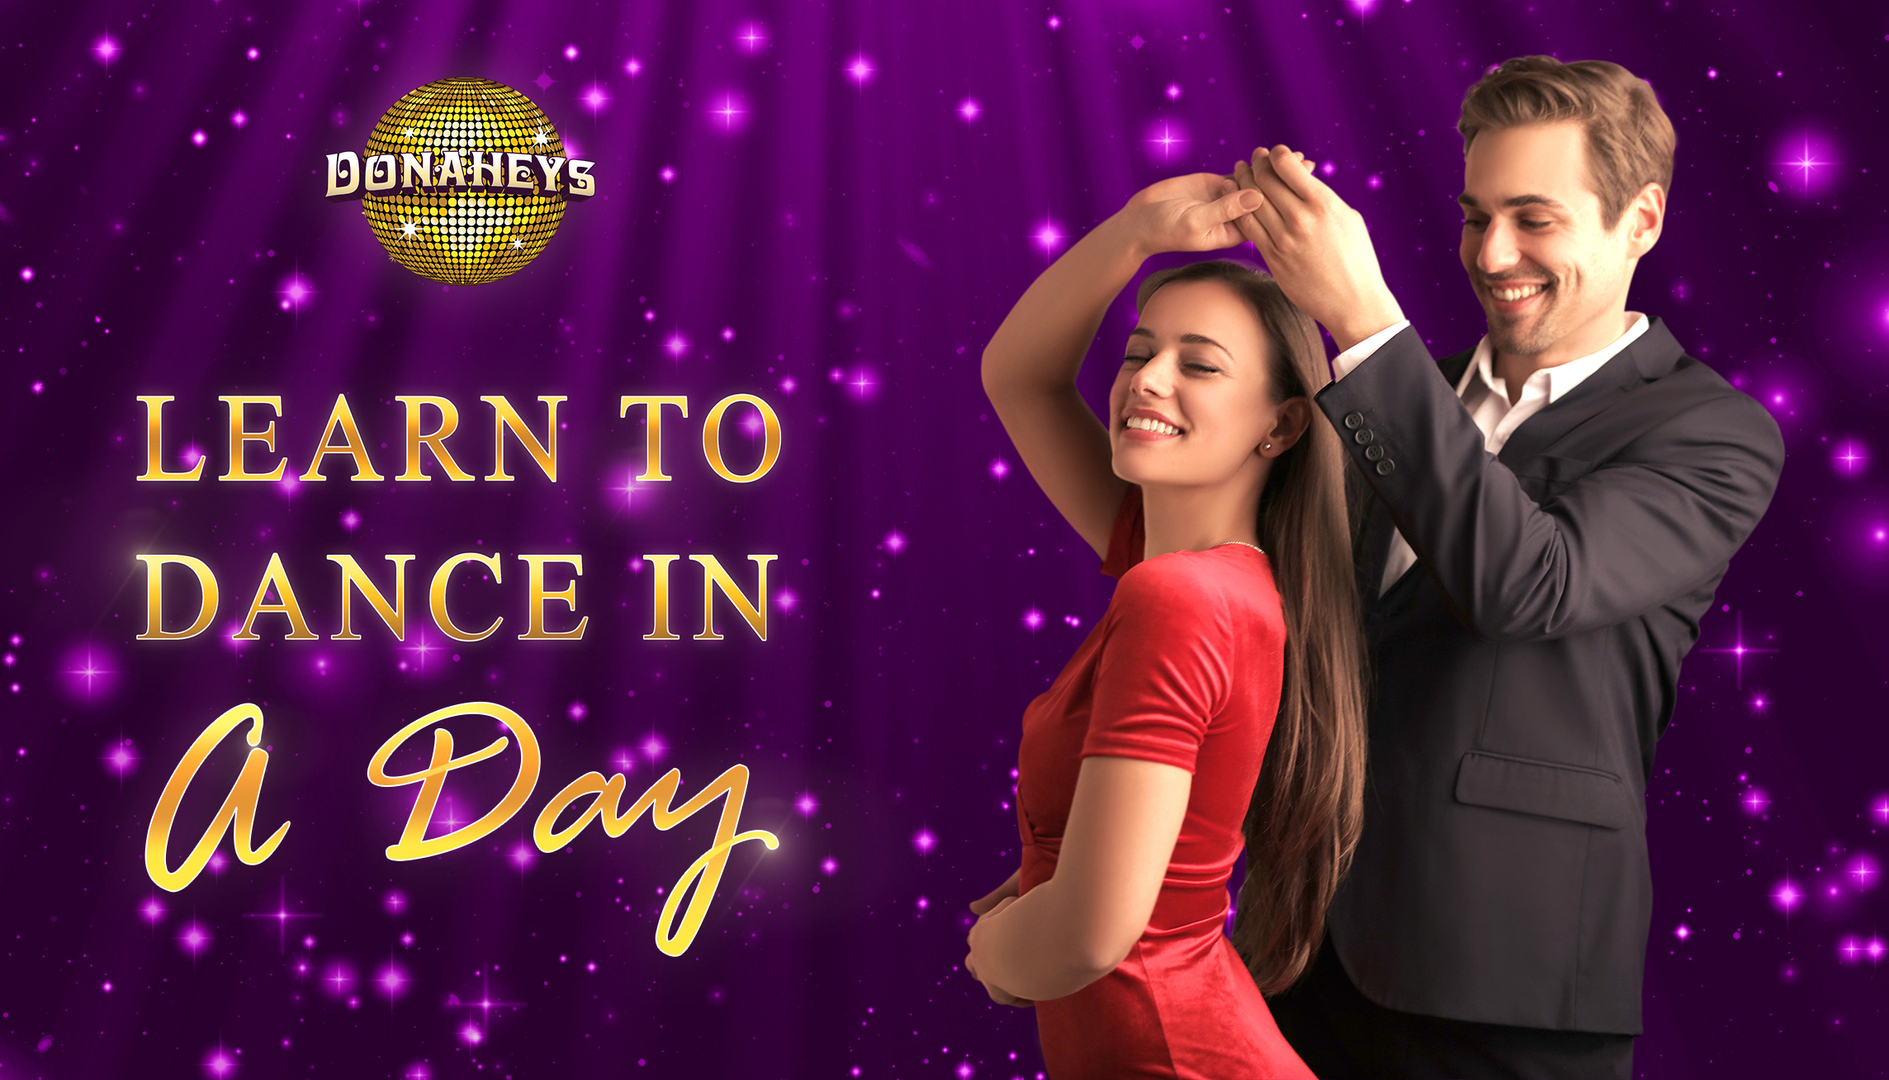 Donaheys Learn to Dance in a Day Workshop, Solihull, England, United Kingdom